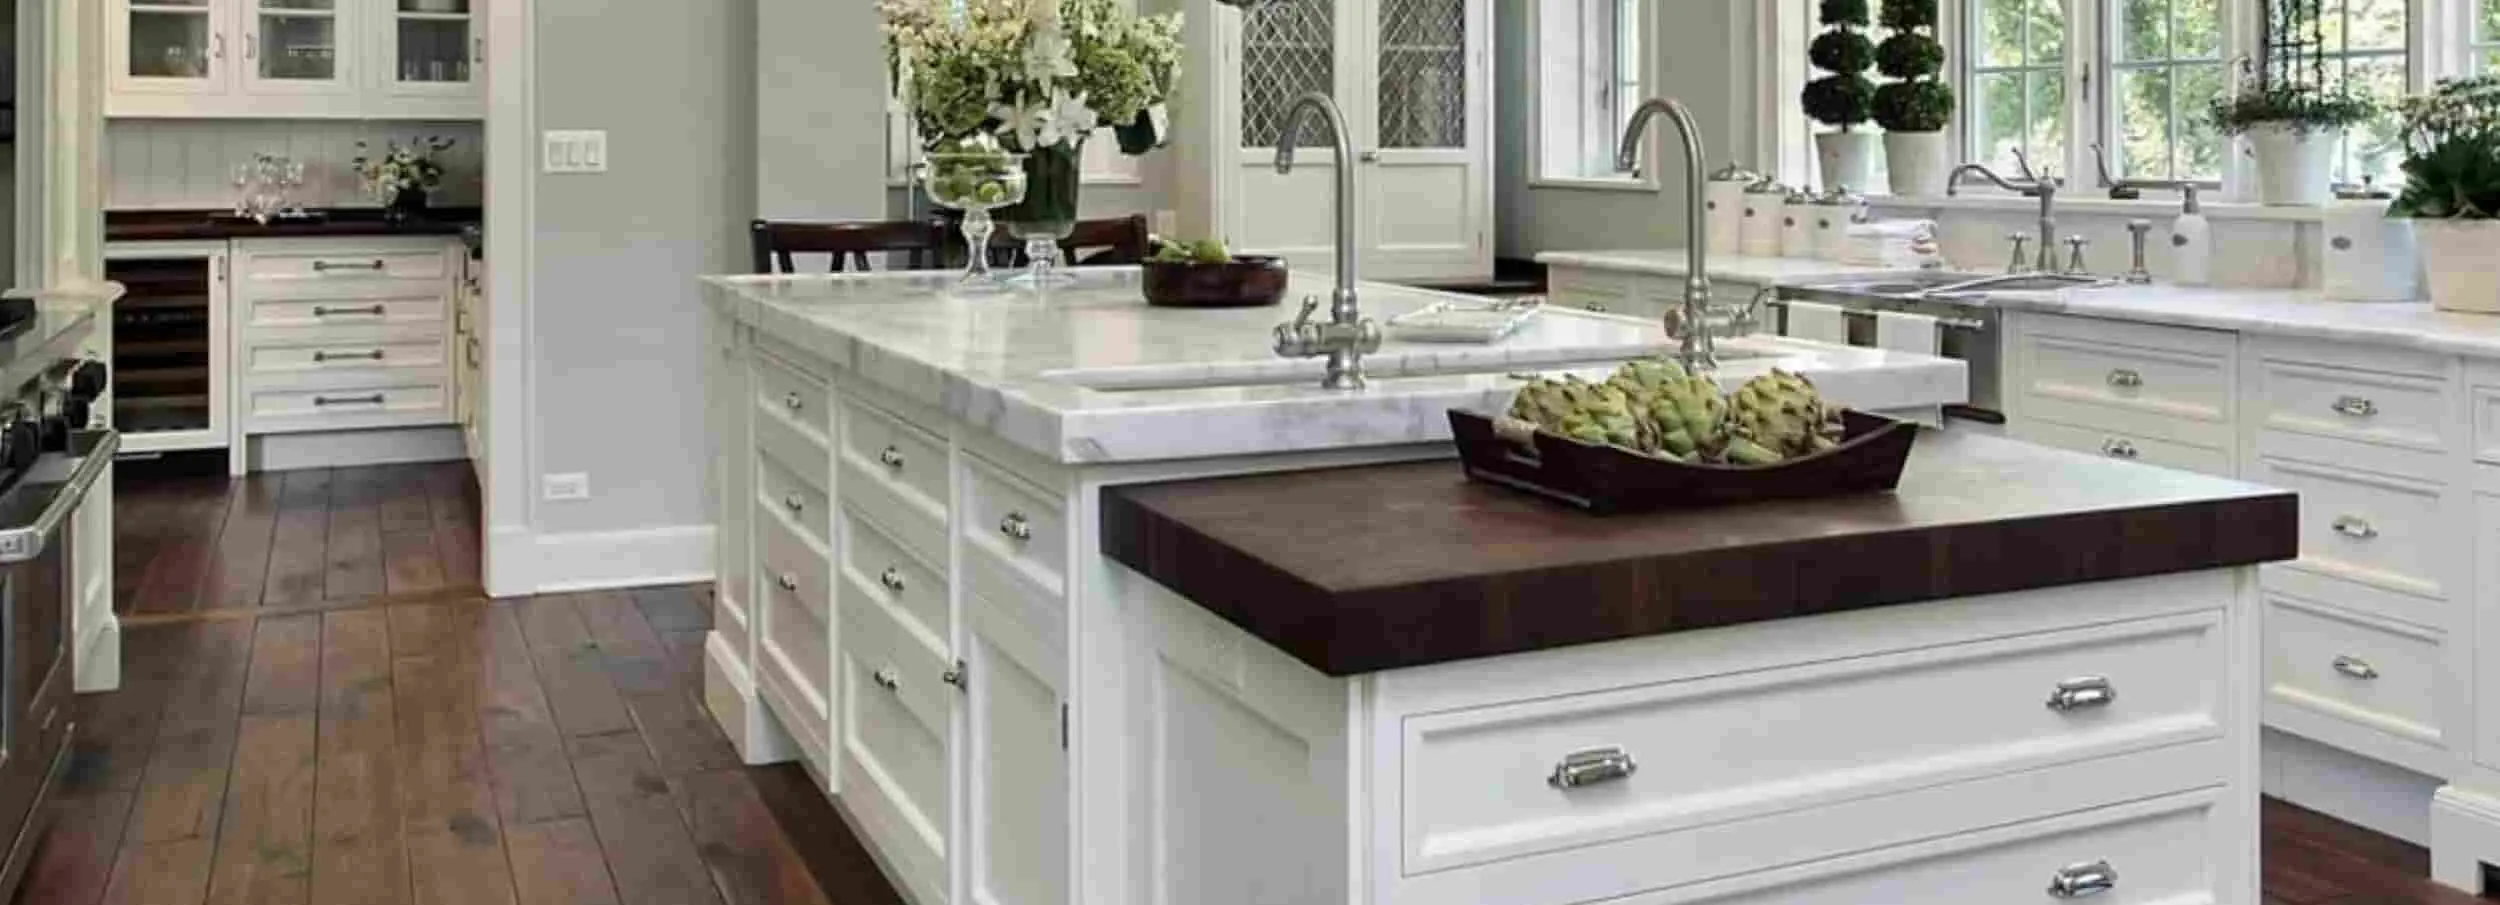 A kitchen in white with black marble countertops.